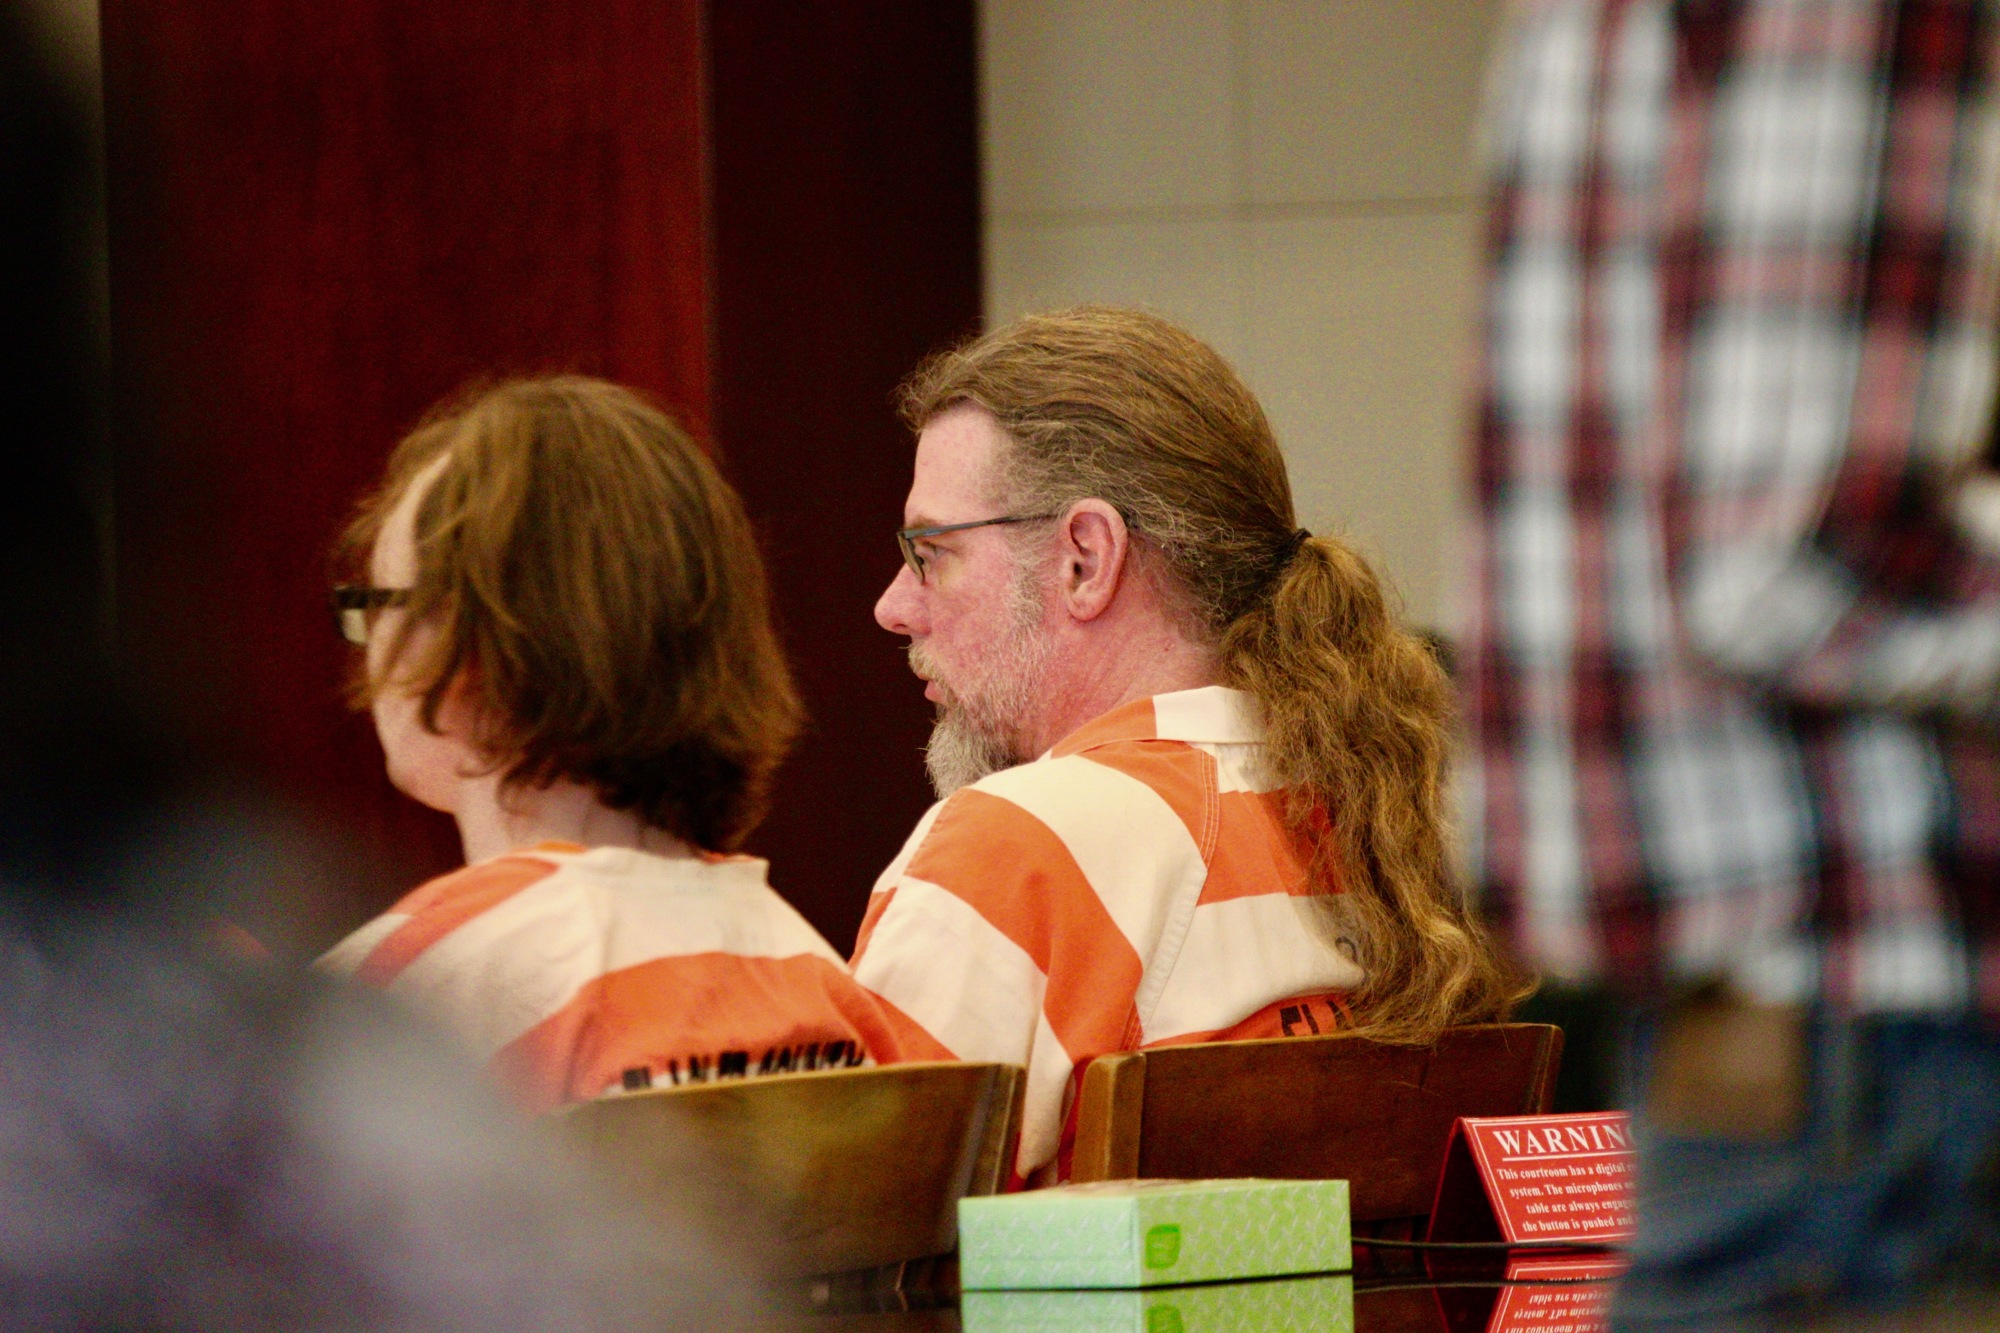 Michael Cummings (right) at his pre-trial hearing on June 12. Photo by Ray Boone